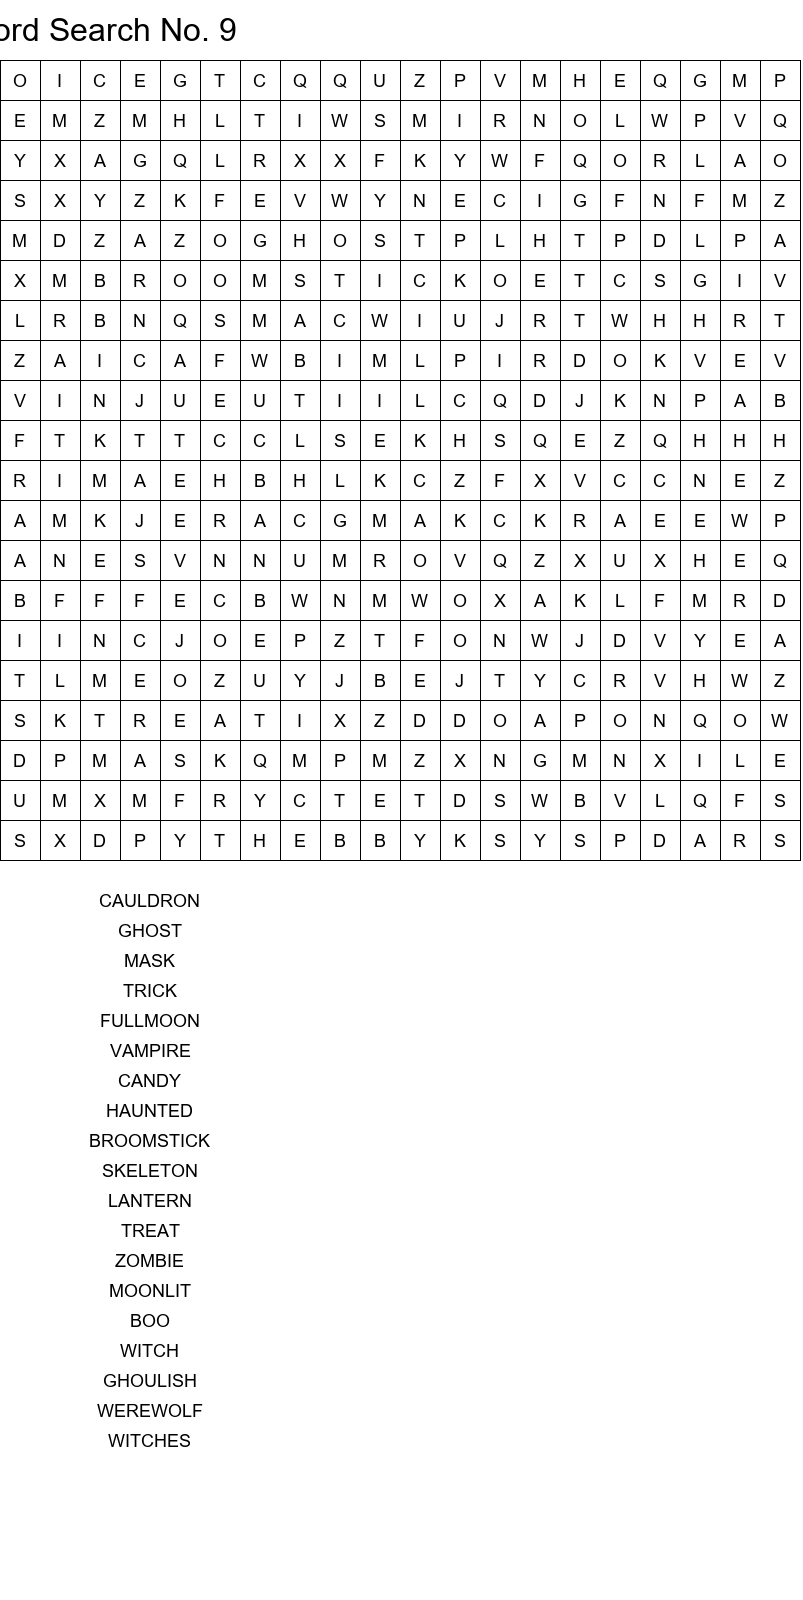 Top 20x20 Halloween word search with answers size 20x20 No 9